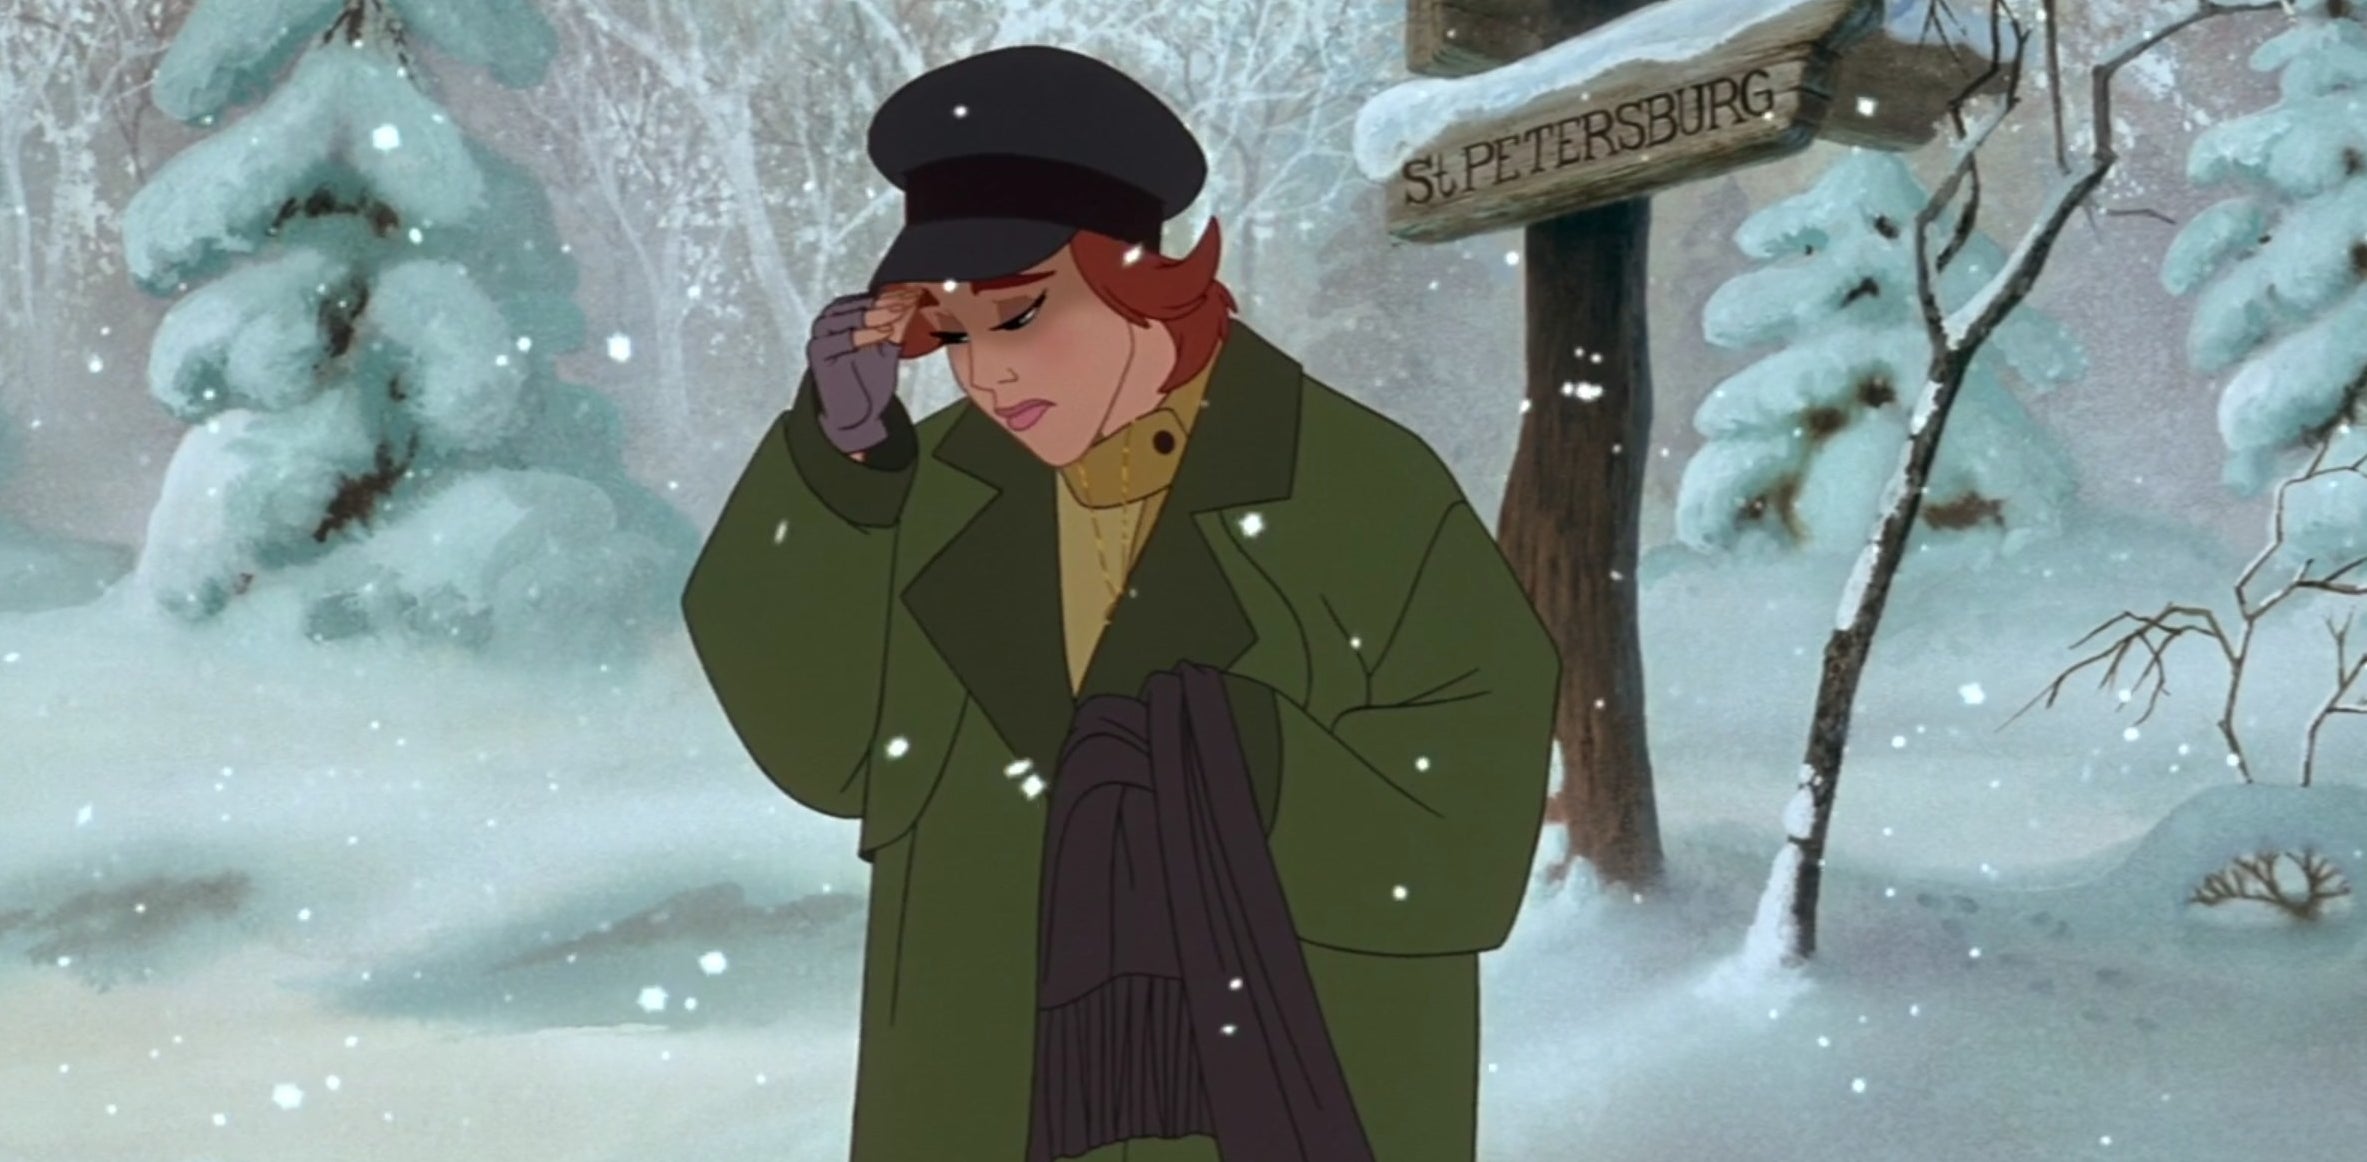 A woman wearing a large jacket stands in the snow